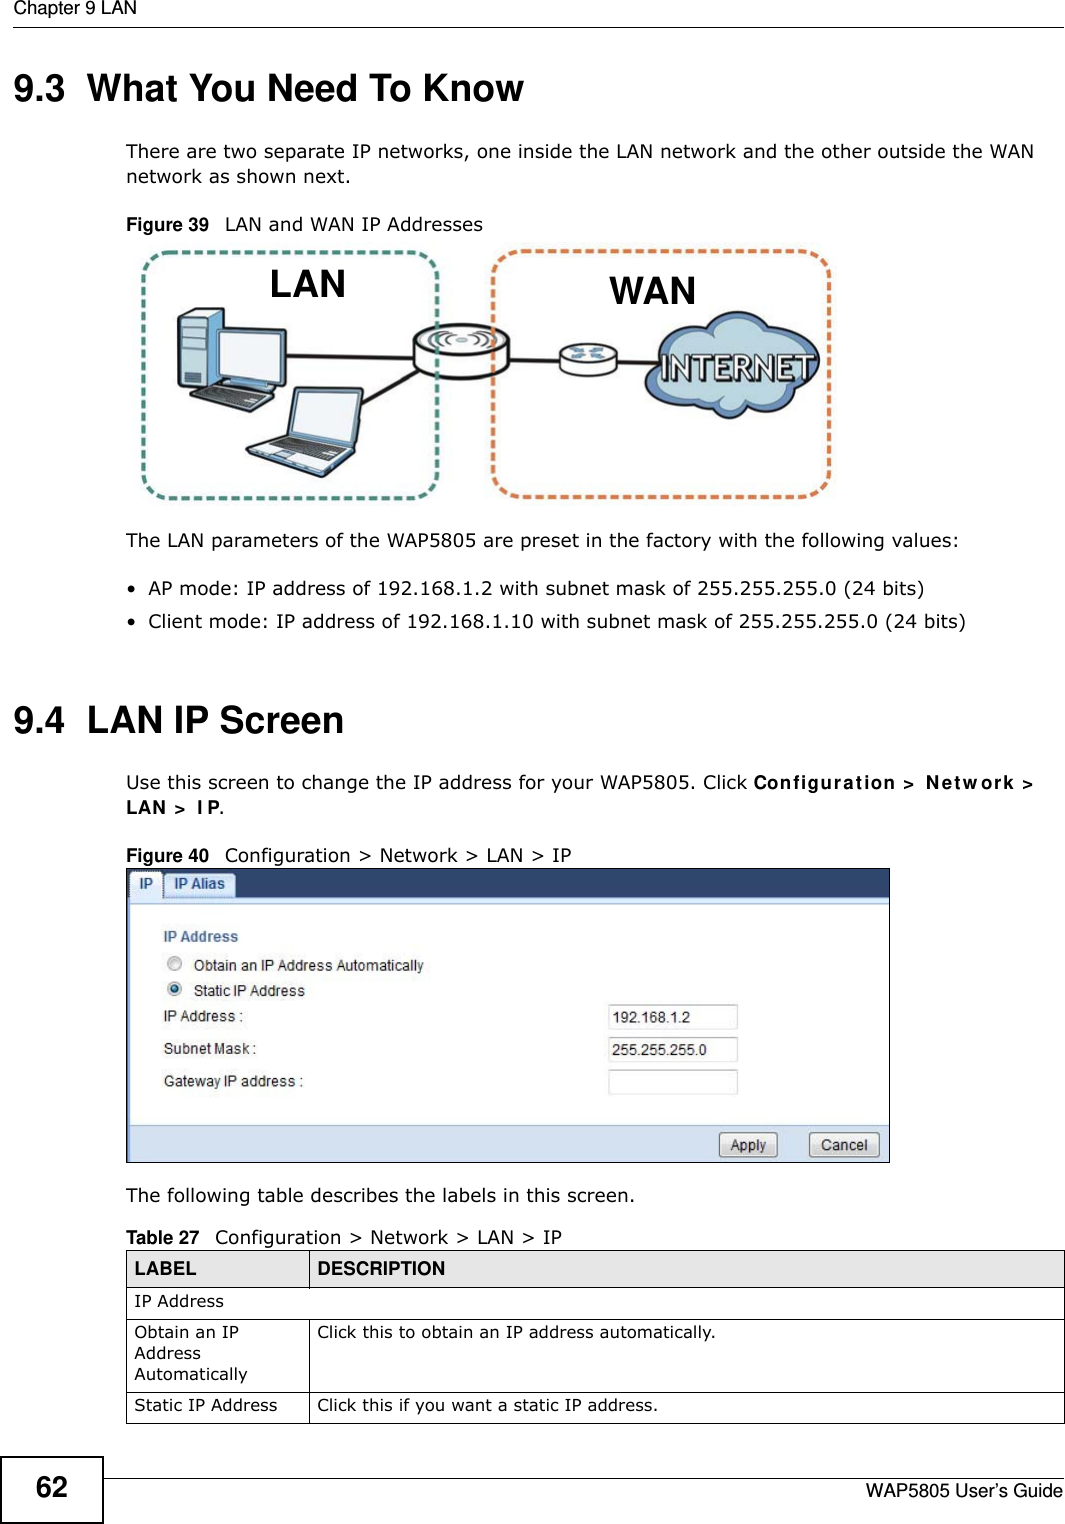 Chapter 9 LANWAP5805 User’s Guide629.3  What You Need To KnowThere are two separate IP networks, one inside the LAN network and the other outside the WAN network as shown next.Figure 39   LAN and WAN IP AddressesThe LAN parameters of the WAP5805 are preset in the factory with the following values:• AP mode: IP address of 192.168.1.2 with subnet mask of 255.255.255.0 (24 bits)• Client mode: IP address of 192.168.1.10 with subnet mask of 255.255.255.0 (24 bits)9.4  LAN IP Screen   Use this screen to change the IP address for your WAP5805. Click Configuration &gt; Network &gt; LAN &gt; IP.Figure 40   Configuration &gt; Network &gt; LAN &gt; IP The following table describes the labels in this screen.WANLANTable 27   Configuration &gt; Network &gt; LAN &gt; IPLABEL DESCRIPTIONIP AddressObtain an IP Address AutomaticallyClick this to obtain an IP address automatically.Static IP Address Click this if you want a static IP address.